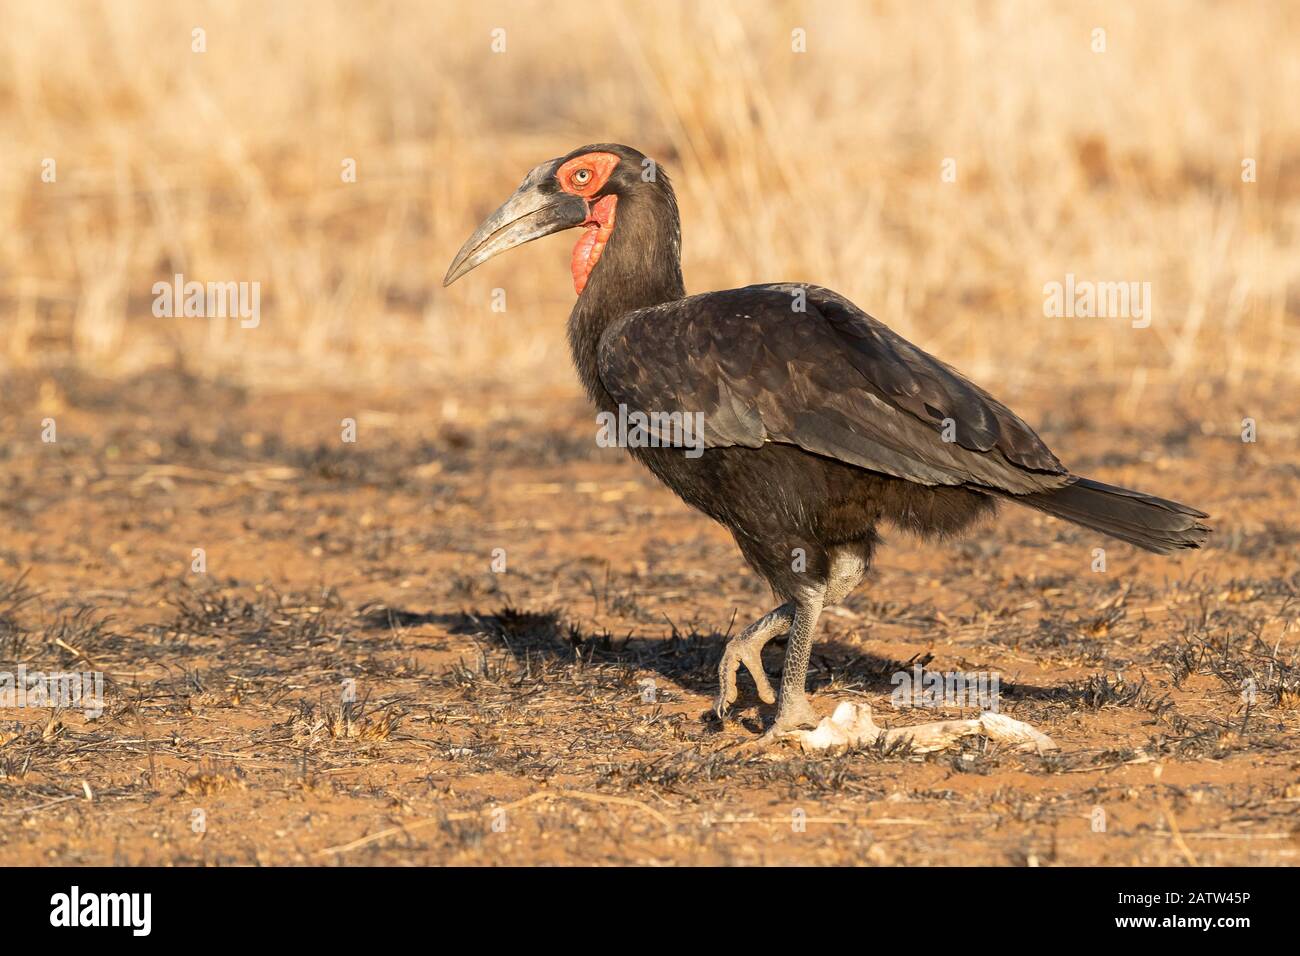 Southern Ground Hornbill (Bucorvus leadbeateri), side view of an adult walking on the ground, Mpumalanga, South Africa Stock Photo